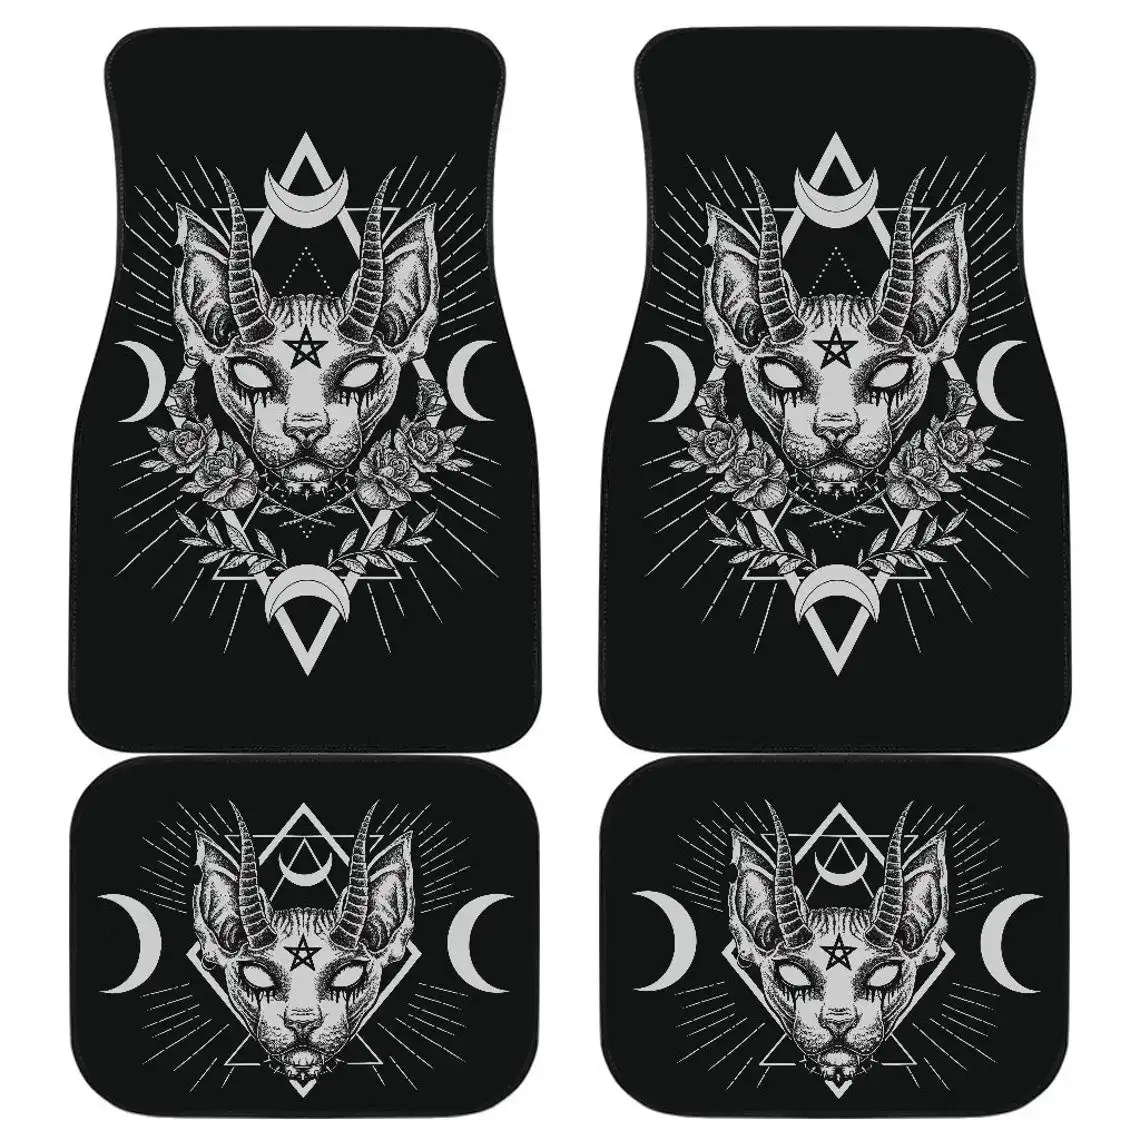 Gothic Occult Black Cat Unique Sphinx Style Awesome Demonic White Eye Car Floor Mats